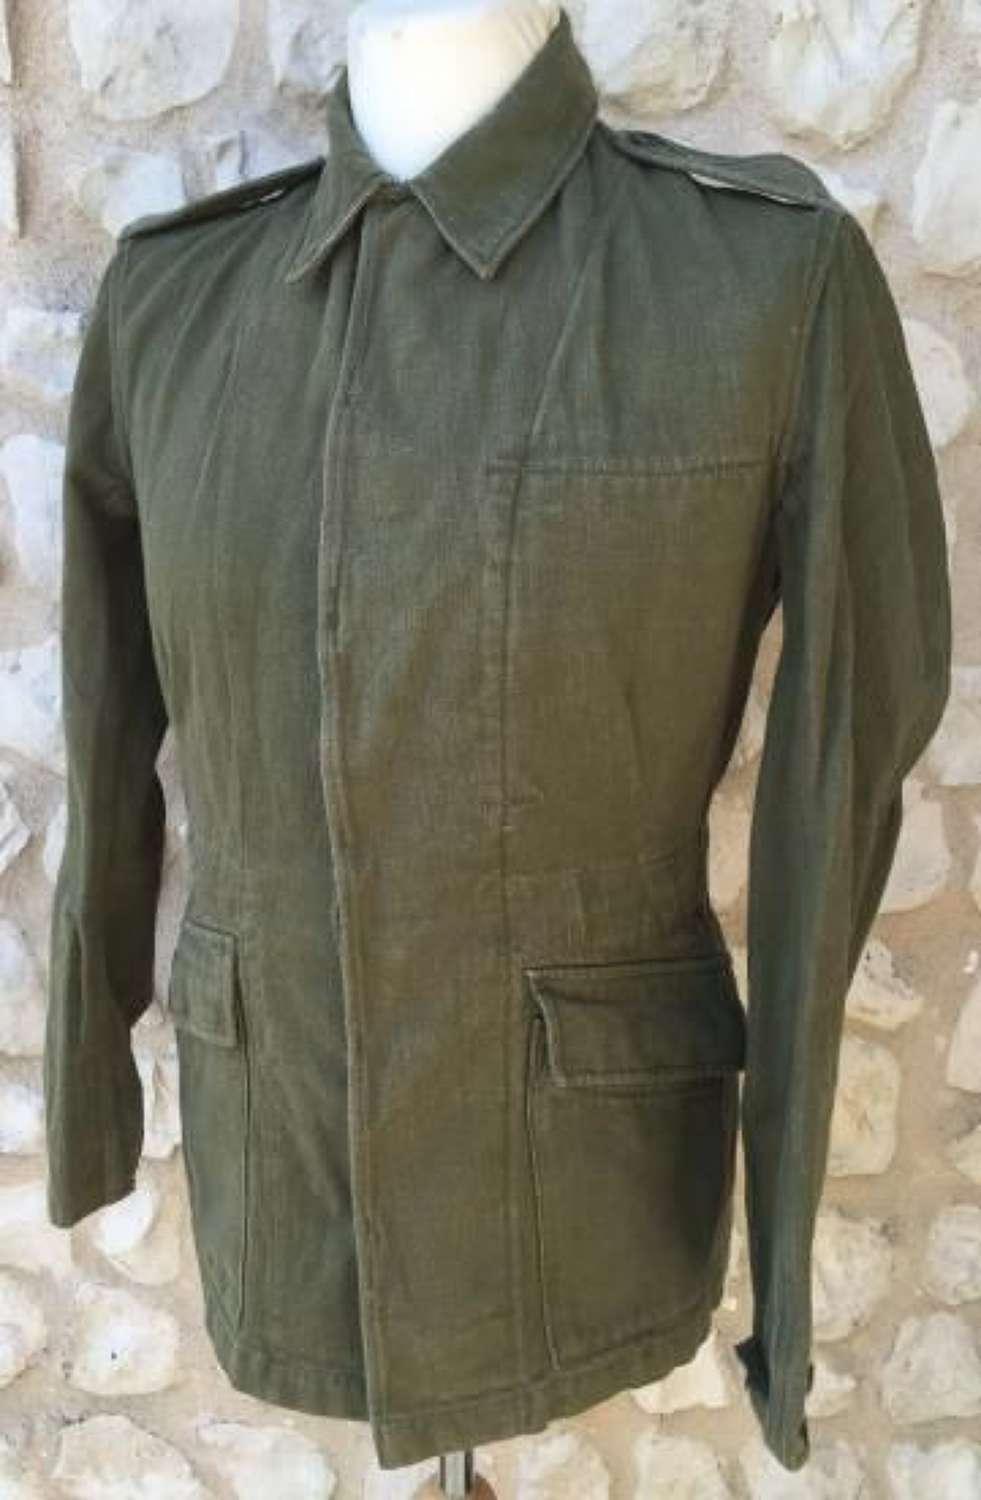 Jackets, Overall 1962